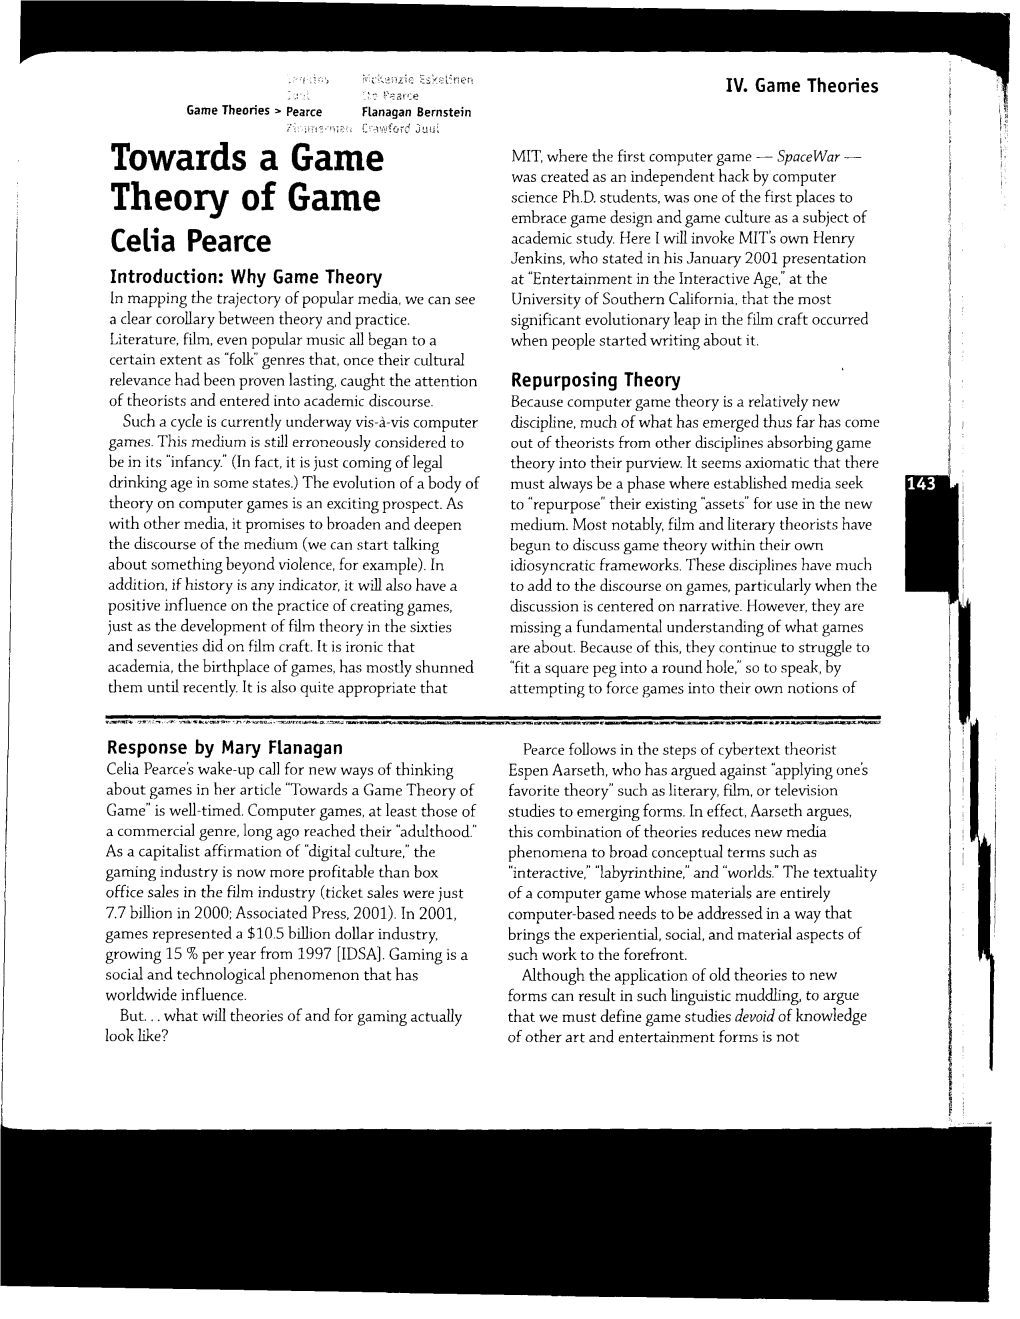 Theory of Game